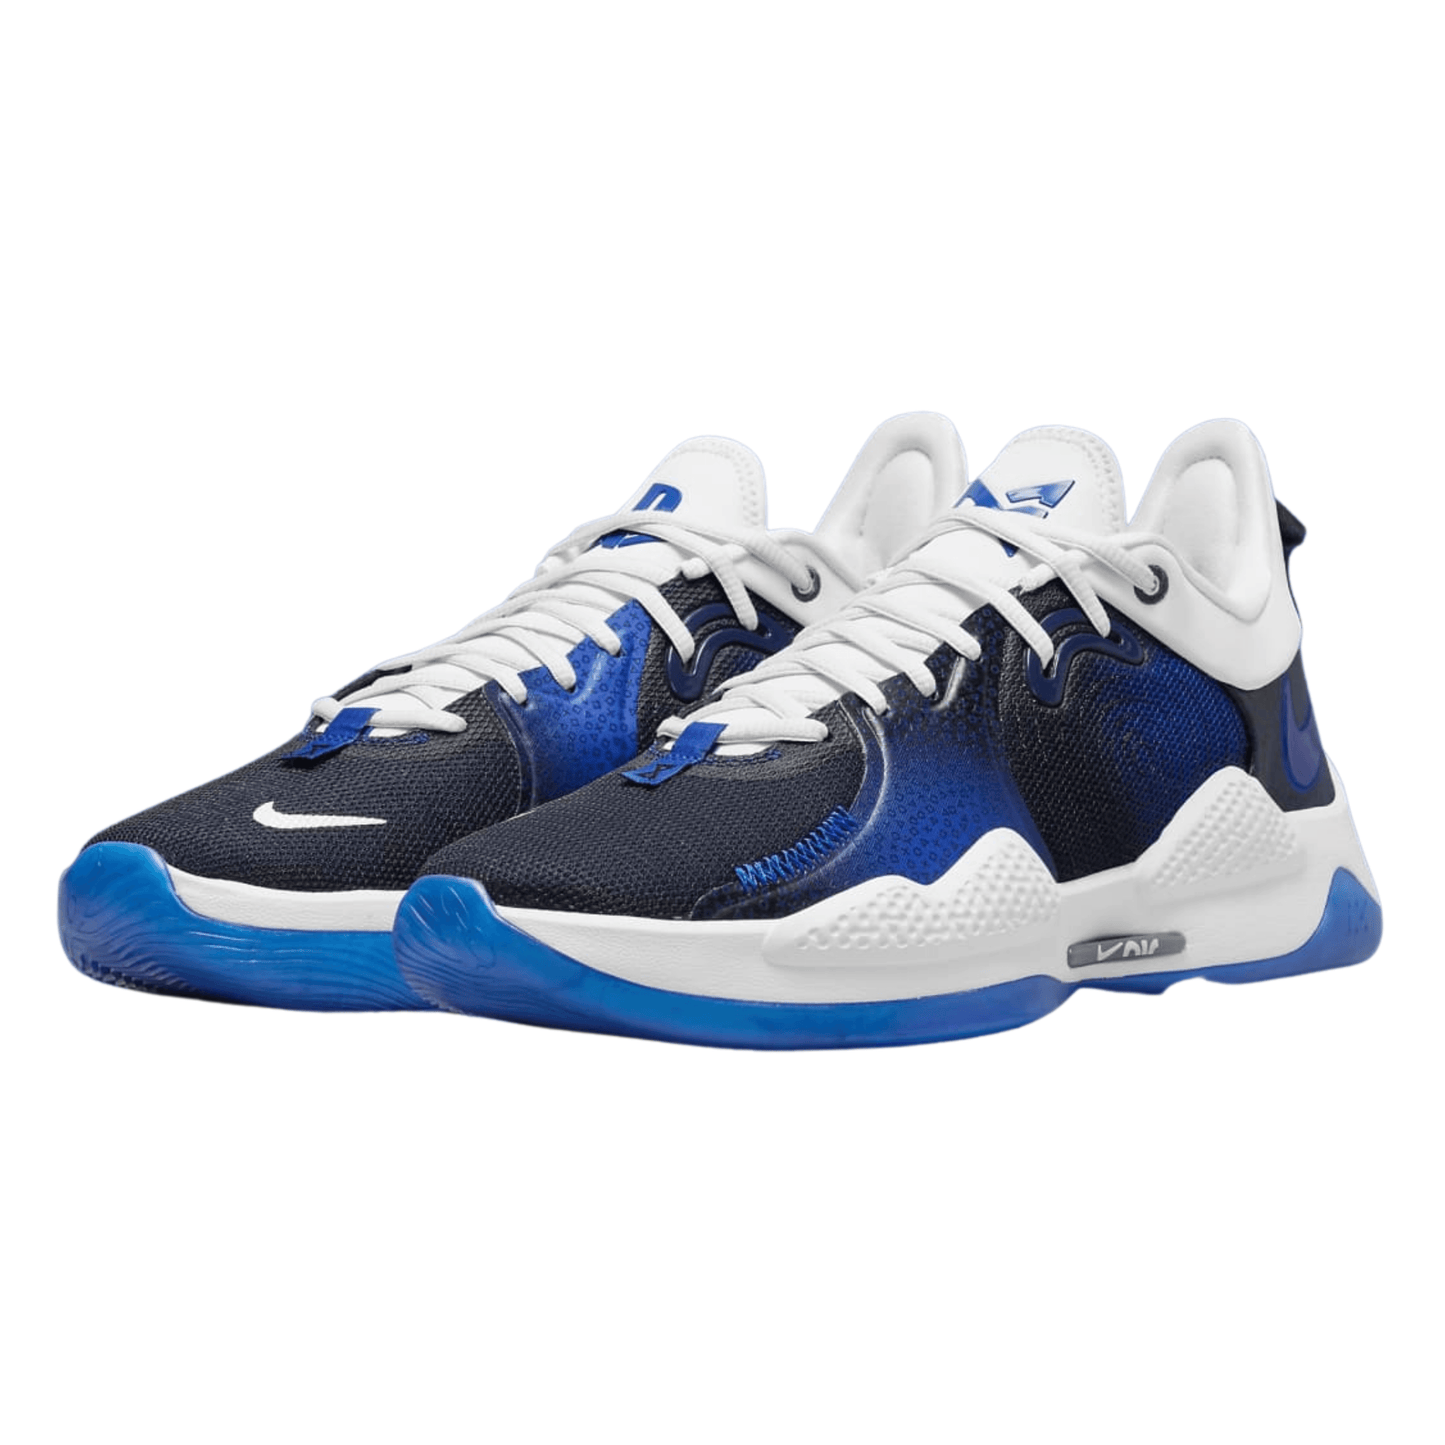 Nike x PlayStation PG 5 'Racer Blue' - FRESNEAKERS